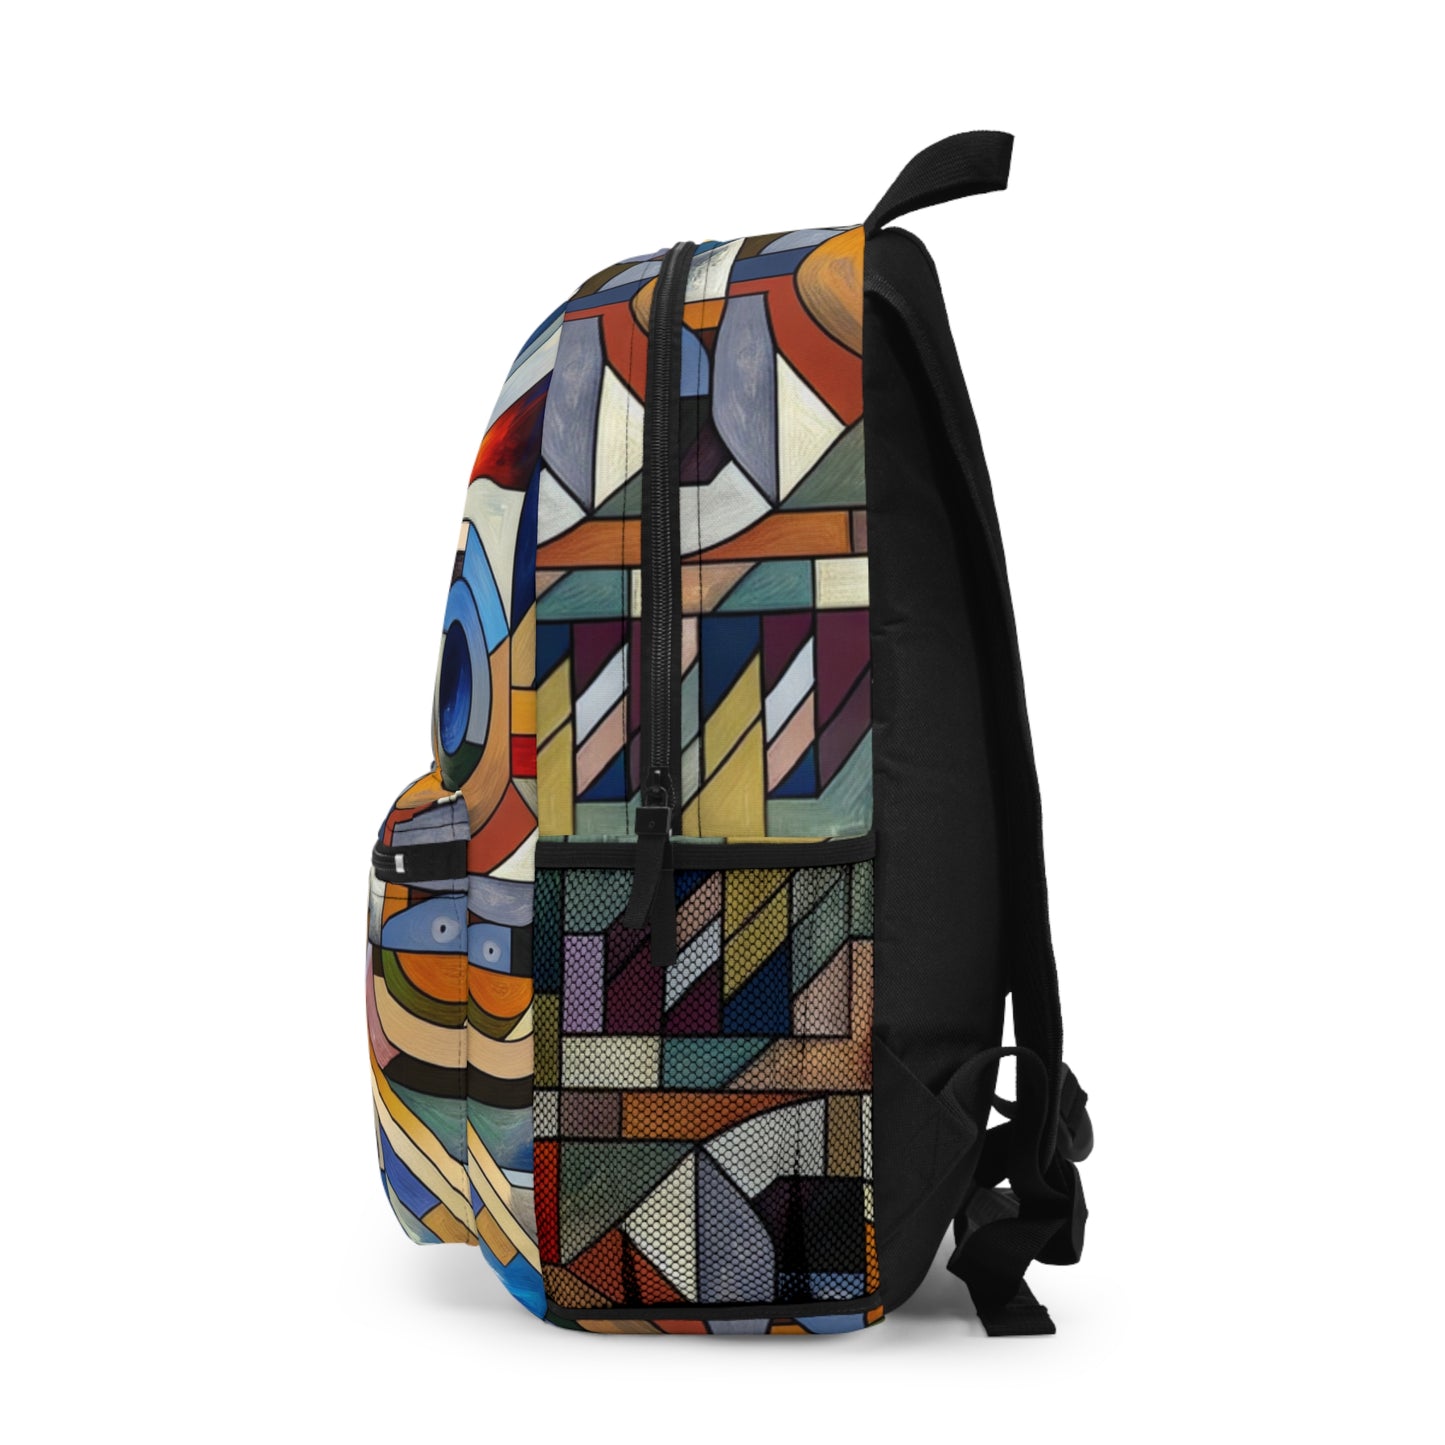 "Urban Fragmentation: An Analytical Cubist Cityscape" - The Alien Backpack Analytical Cubism